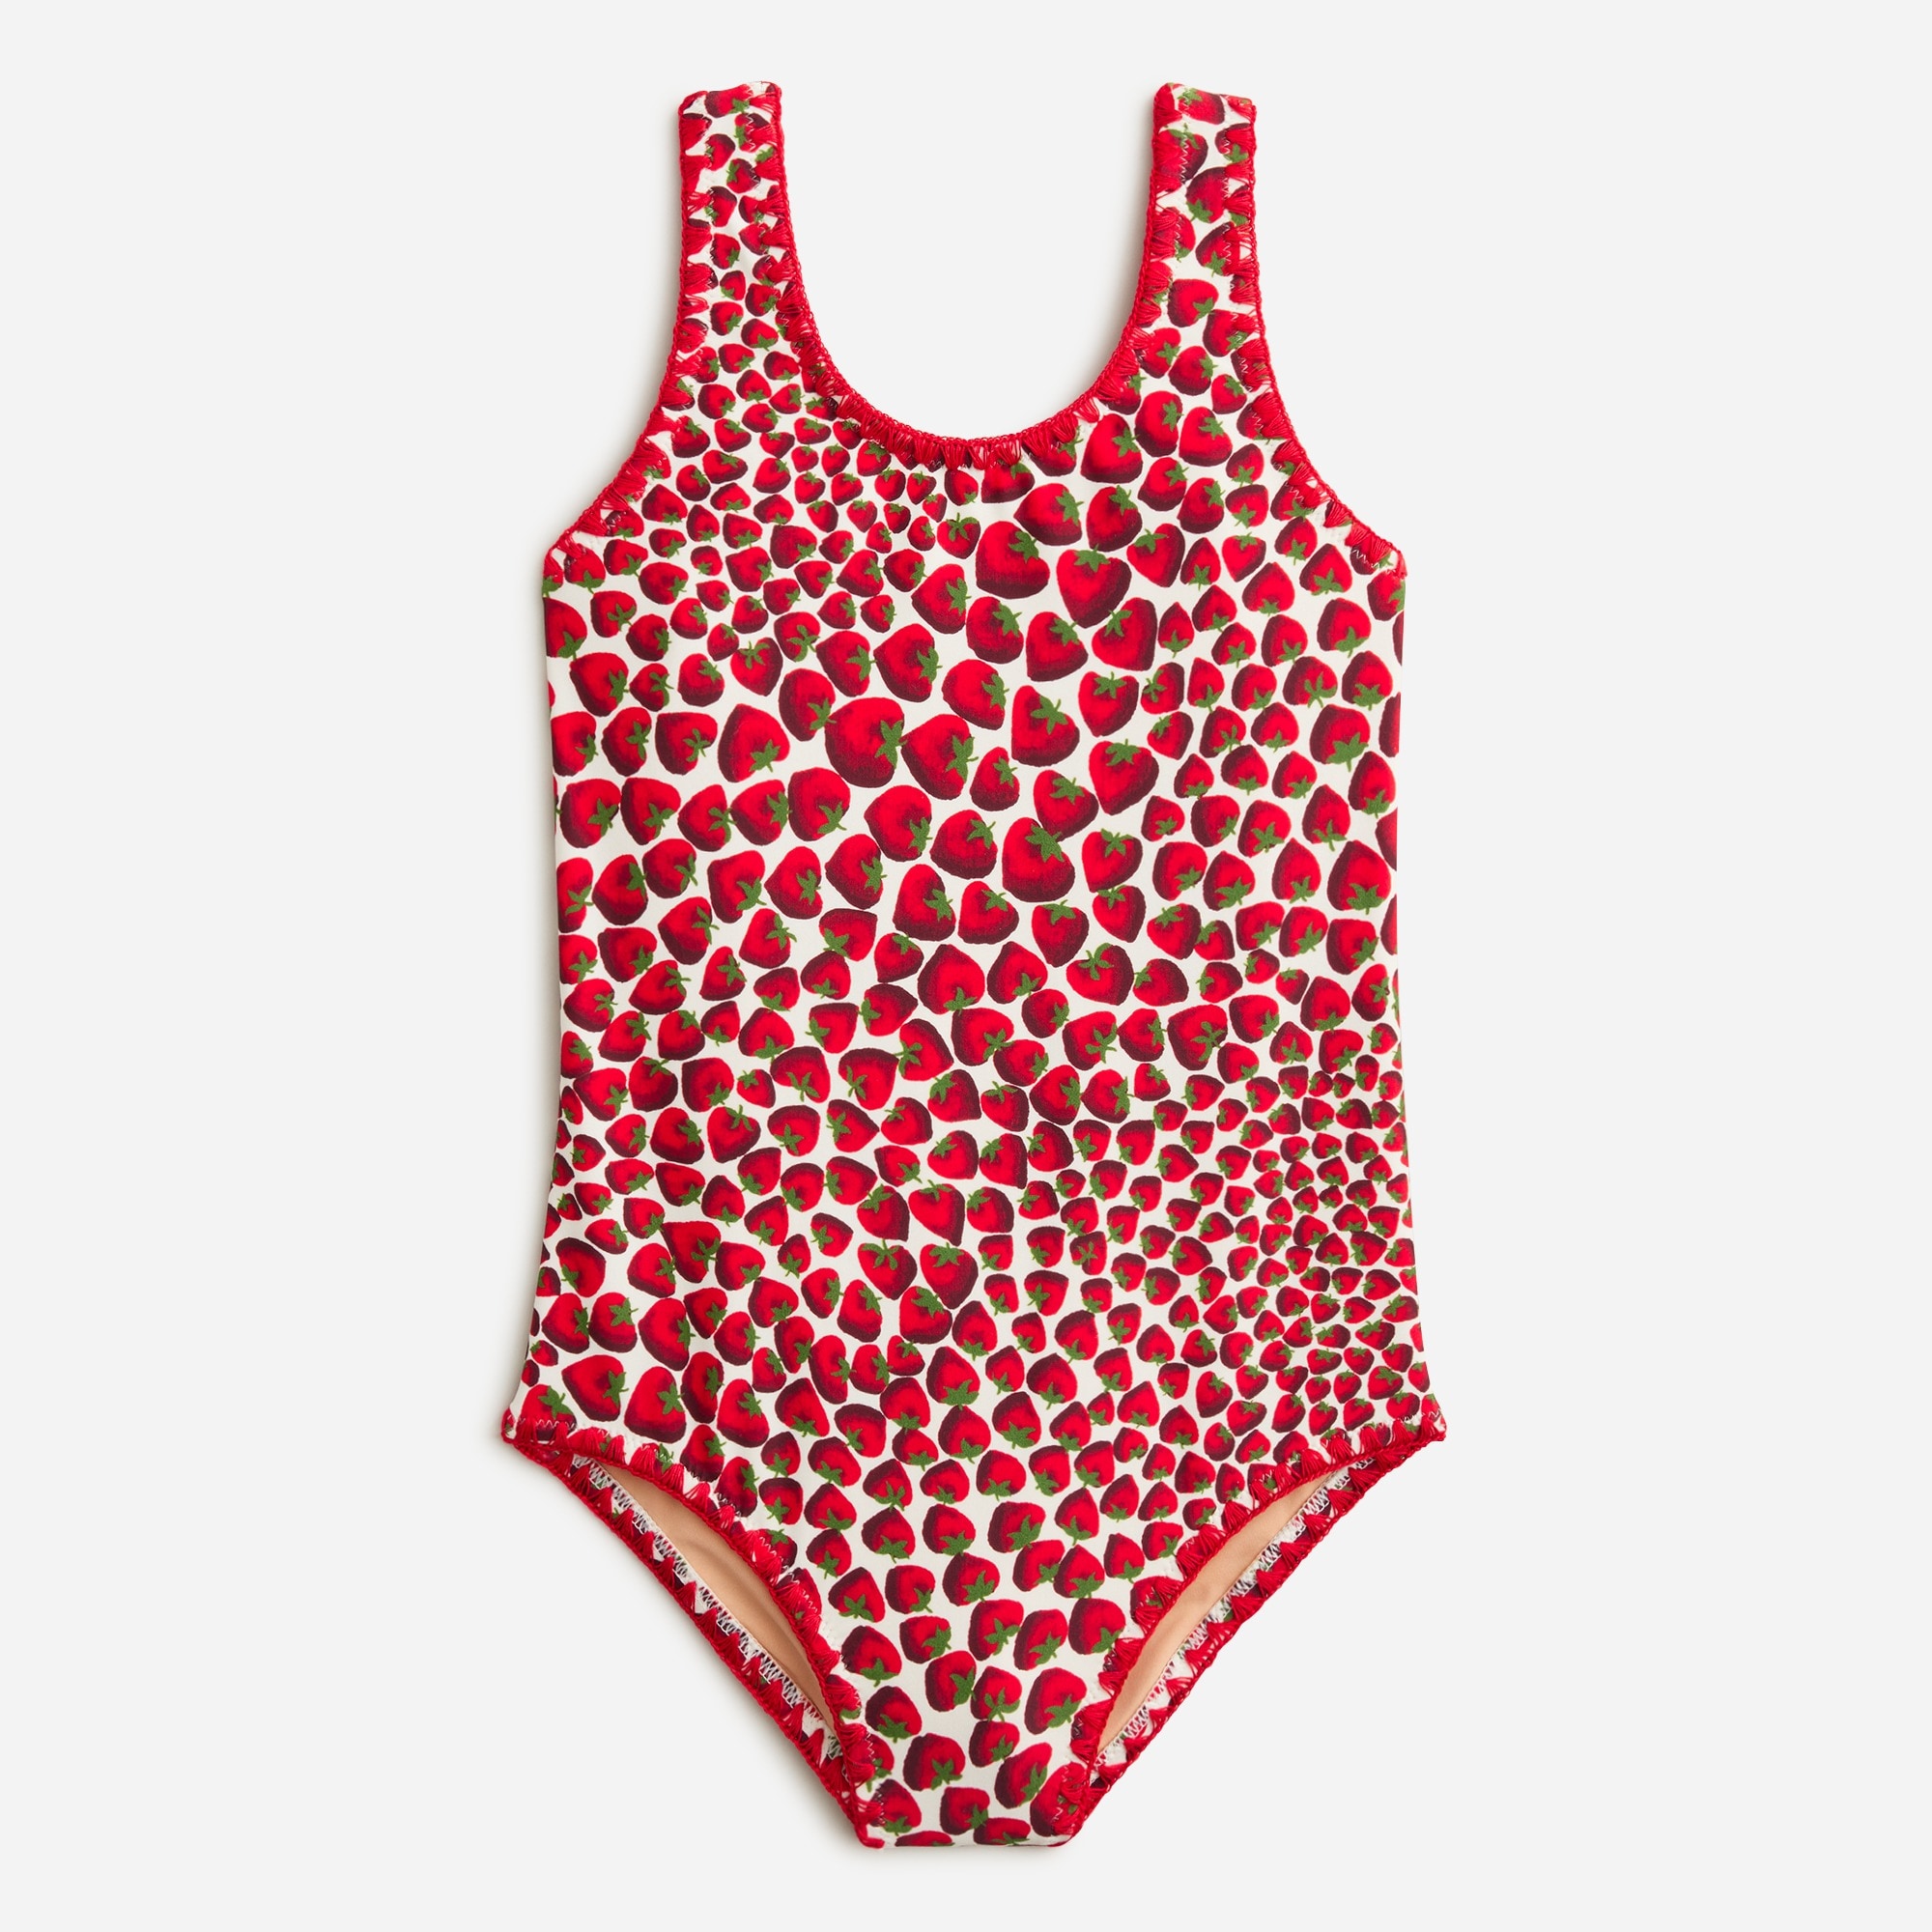  Girls' stitched one-piece swimsuit with UPF 50+